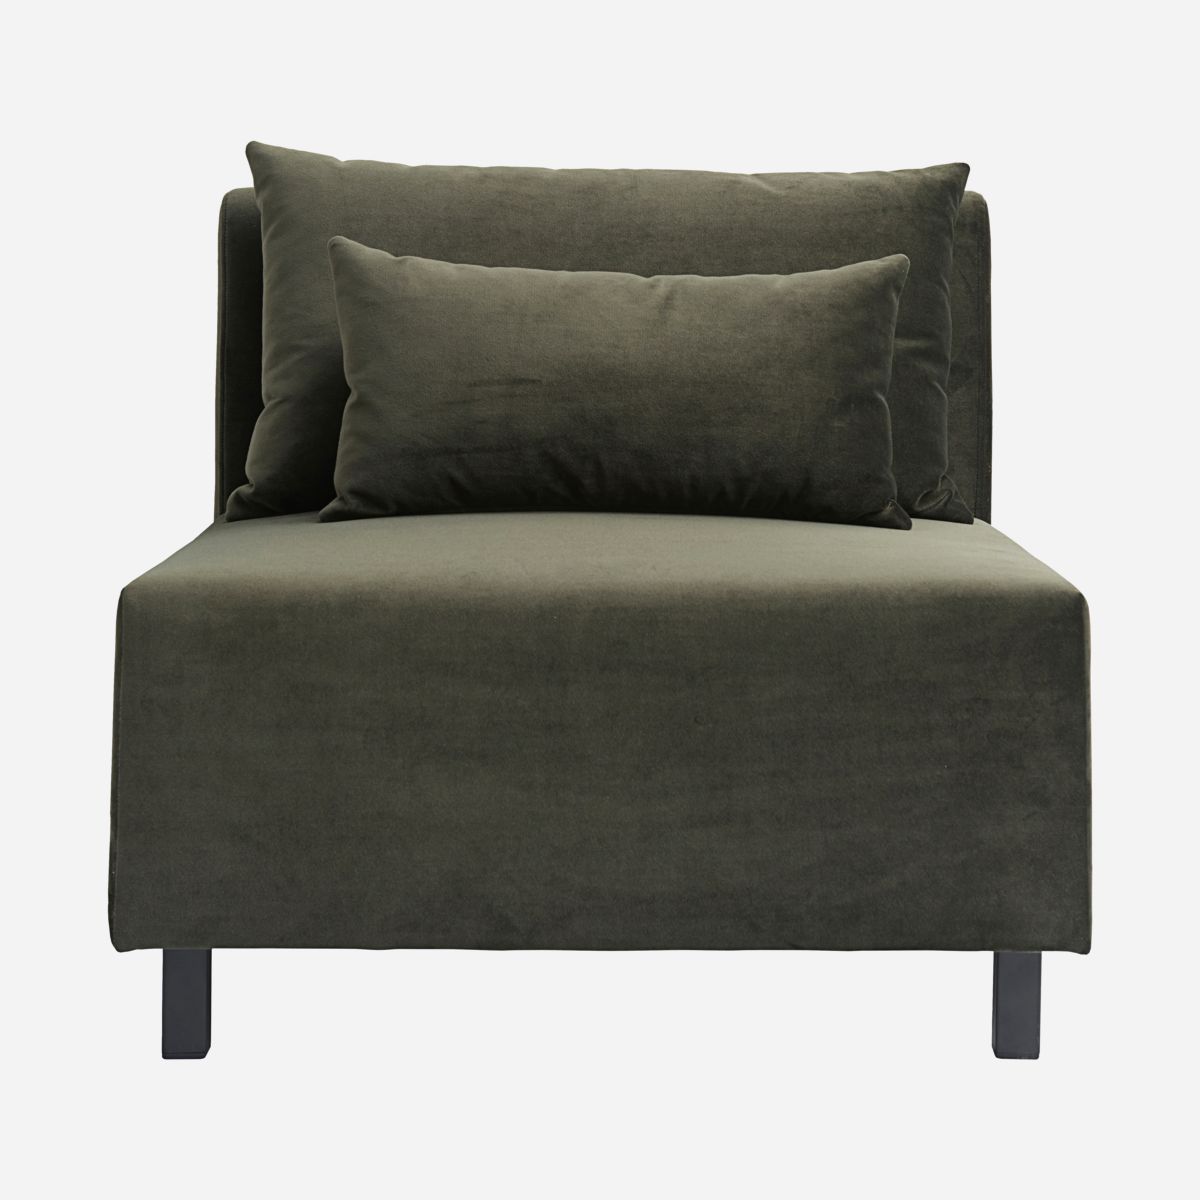 Sofa, Middle section, Slow, Green